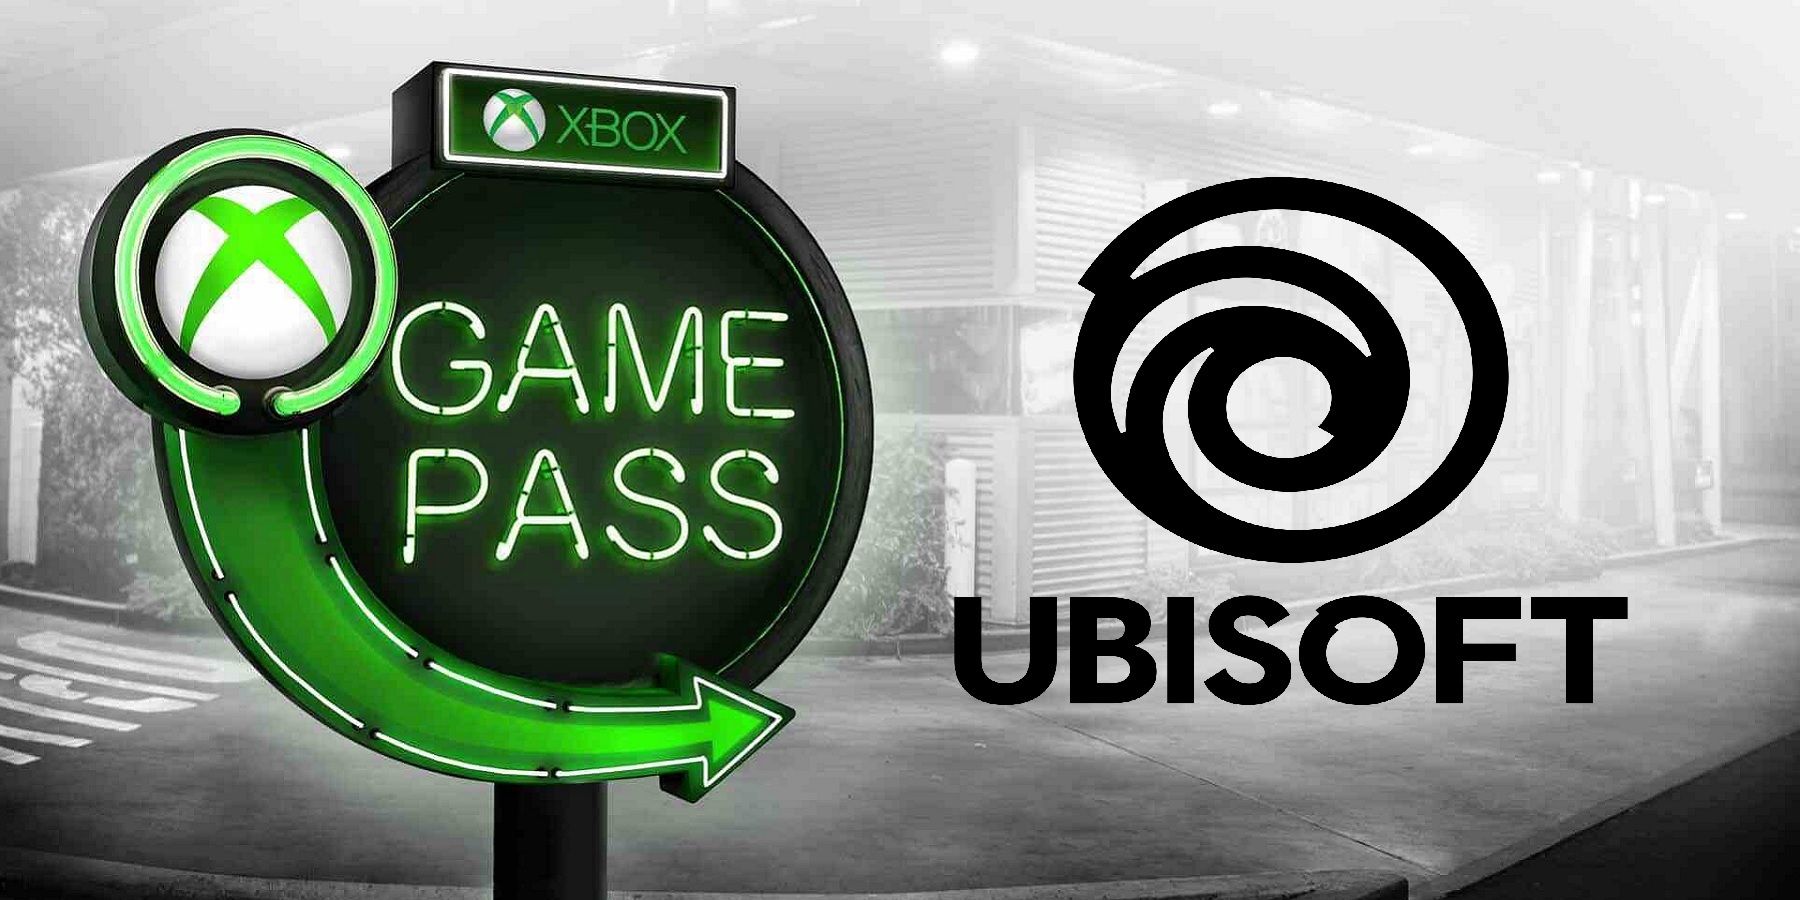 Far Cry 6 coming to Xbox Game Pass? The Ubisoft game appeared